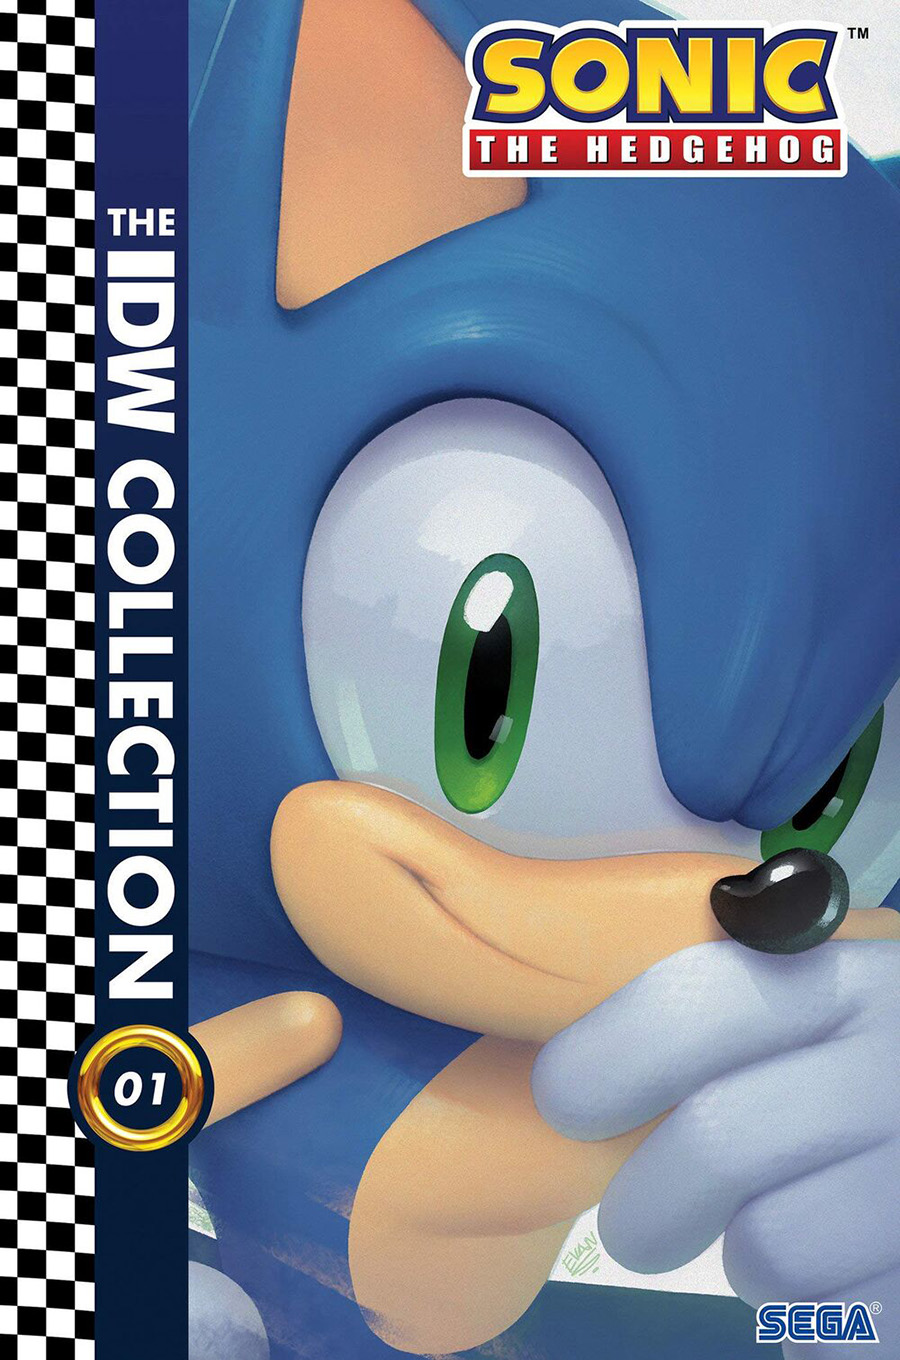 Sonic The Hedgehog IDW Collection Vol 1 HC